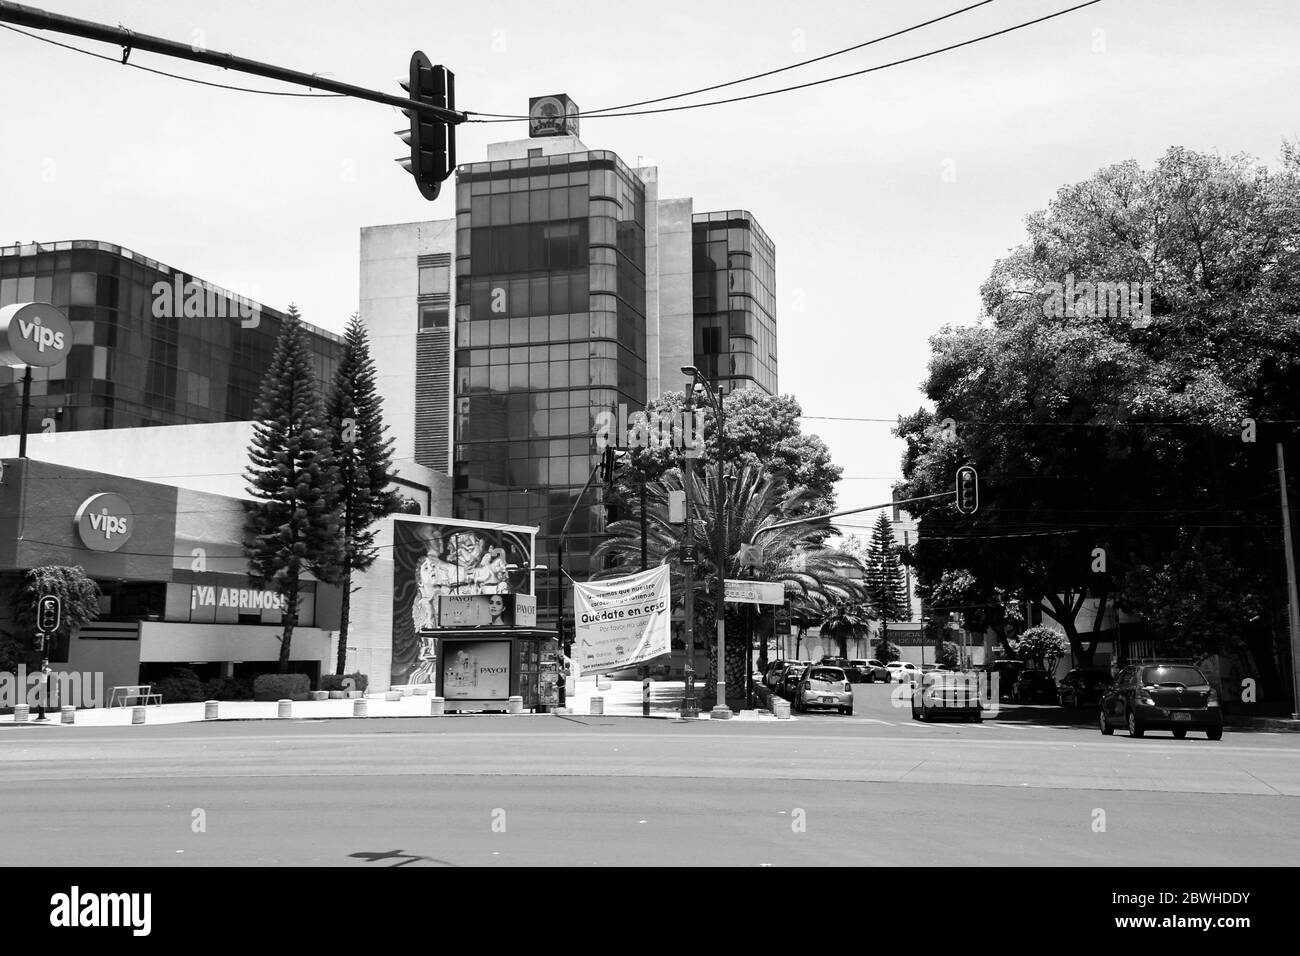 Streetview near metrobus station 'Plaza de la Revolución', on the empty avenue Insurgentes during pandemic covid-19 with big sign 'stay home' Stock Photo